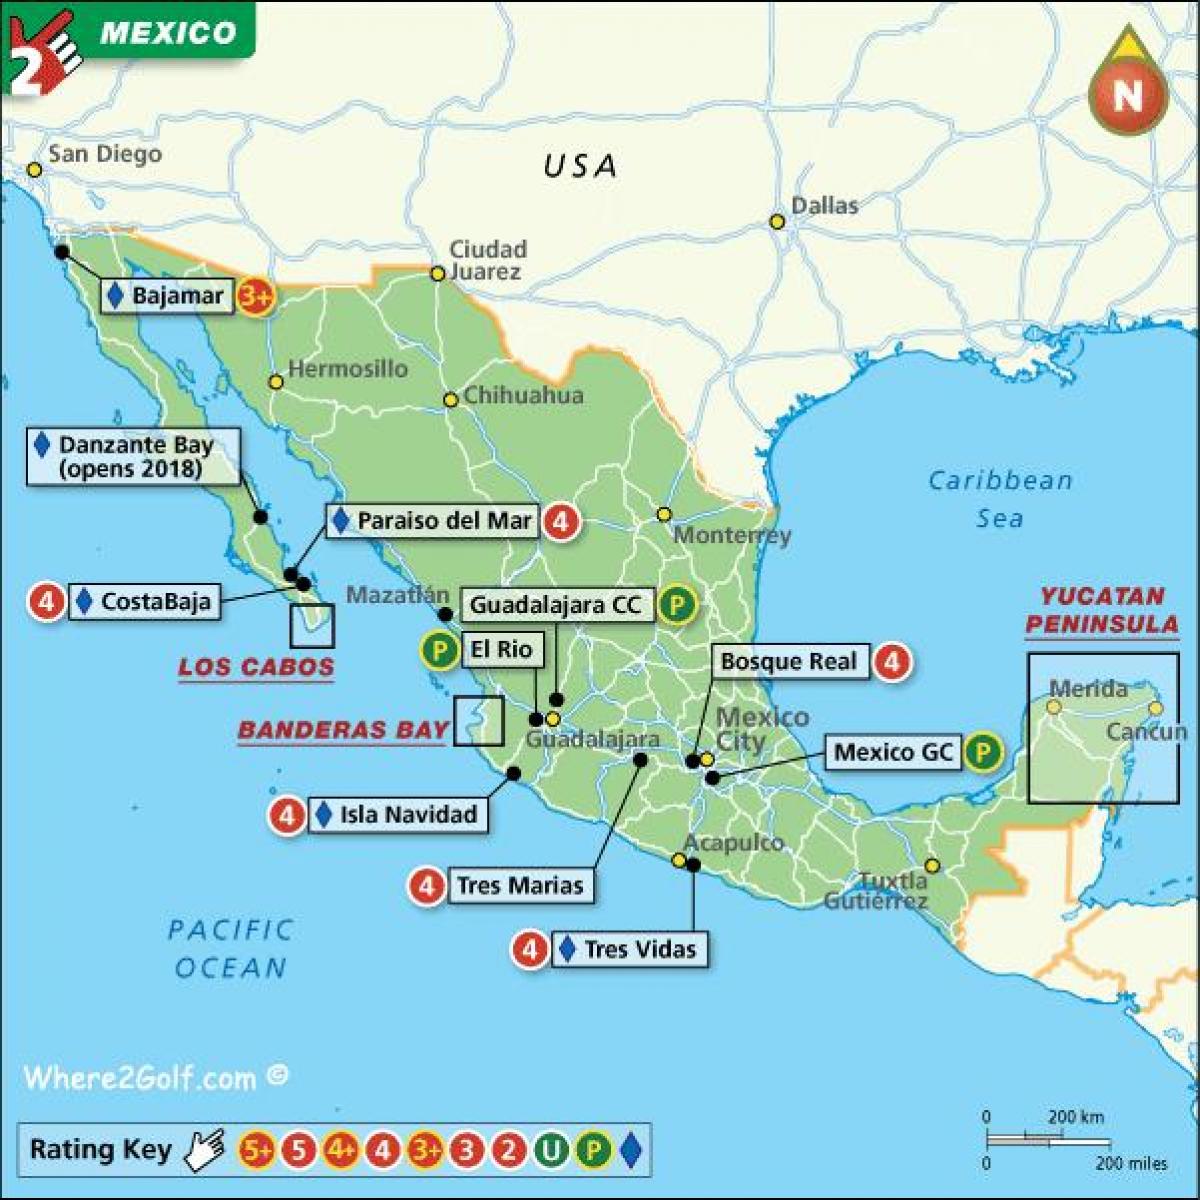 Map of Mexico resorts - Mexico map resorts (Central America - Americas)